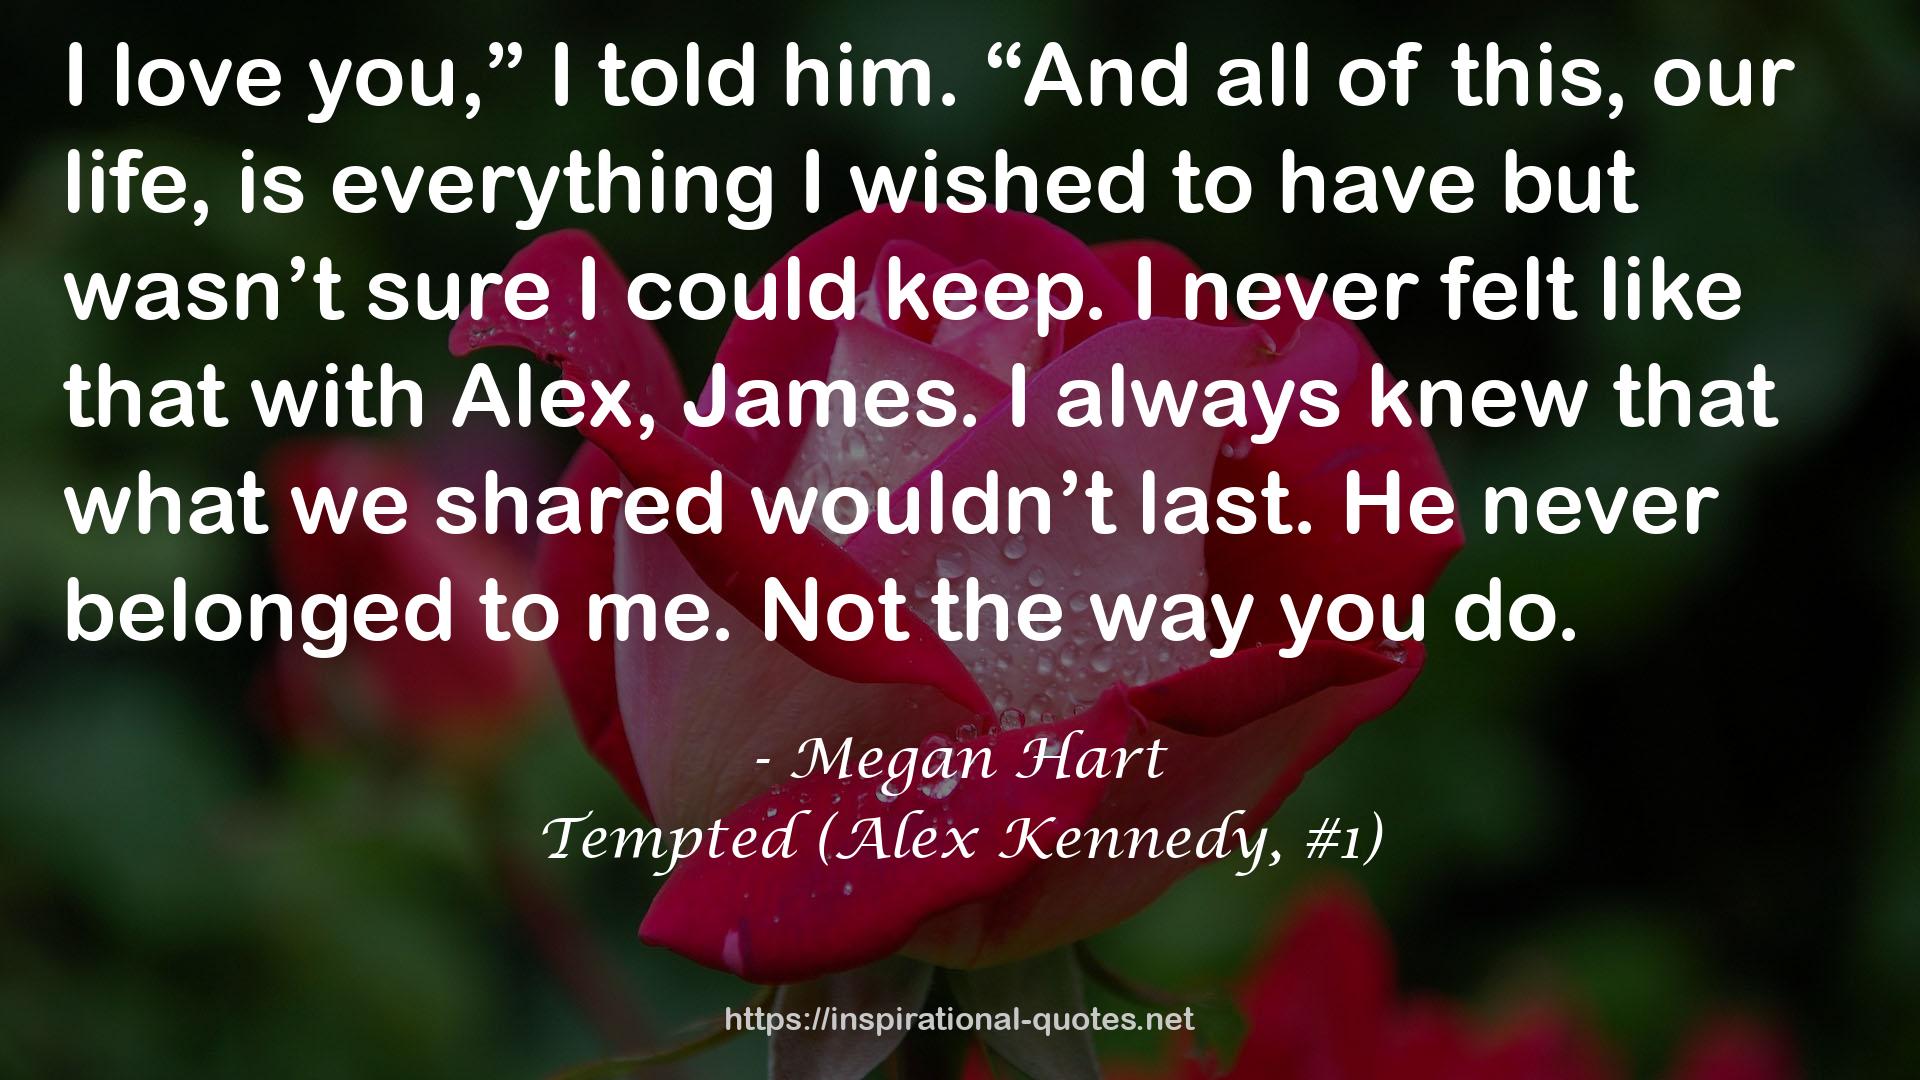 Tempted (Alex Kennedy, #1) QUOTES